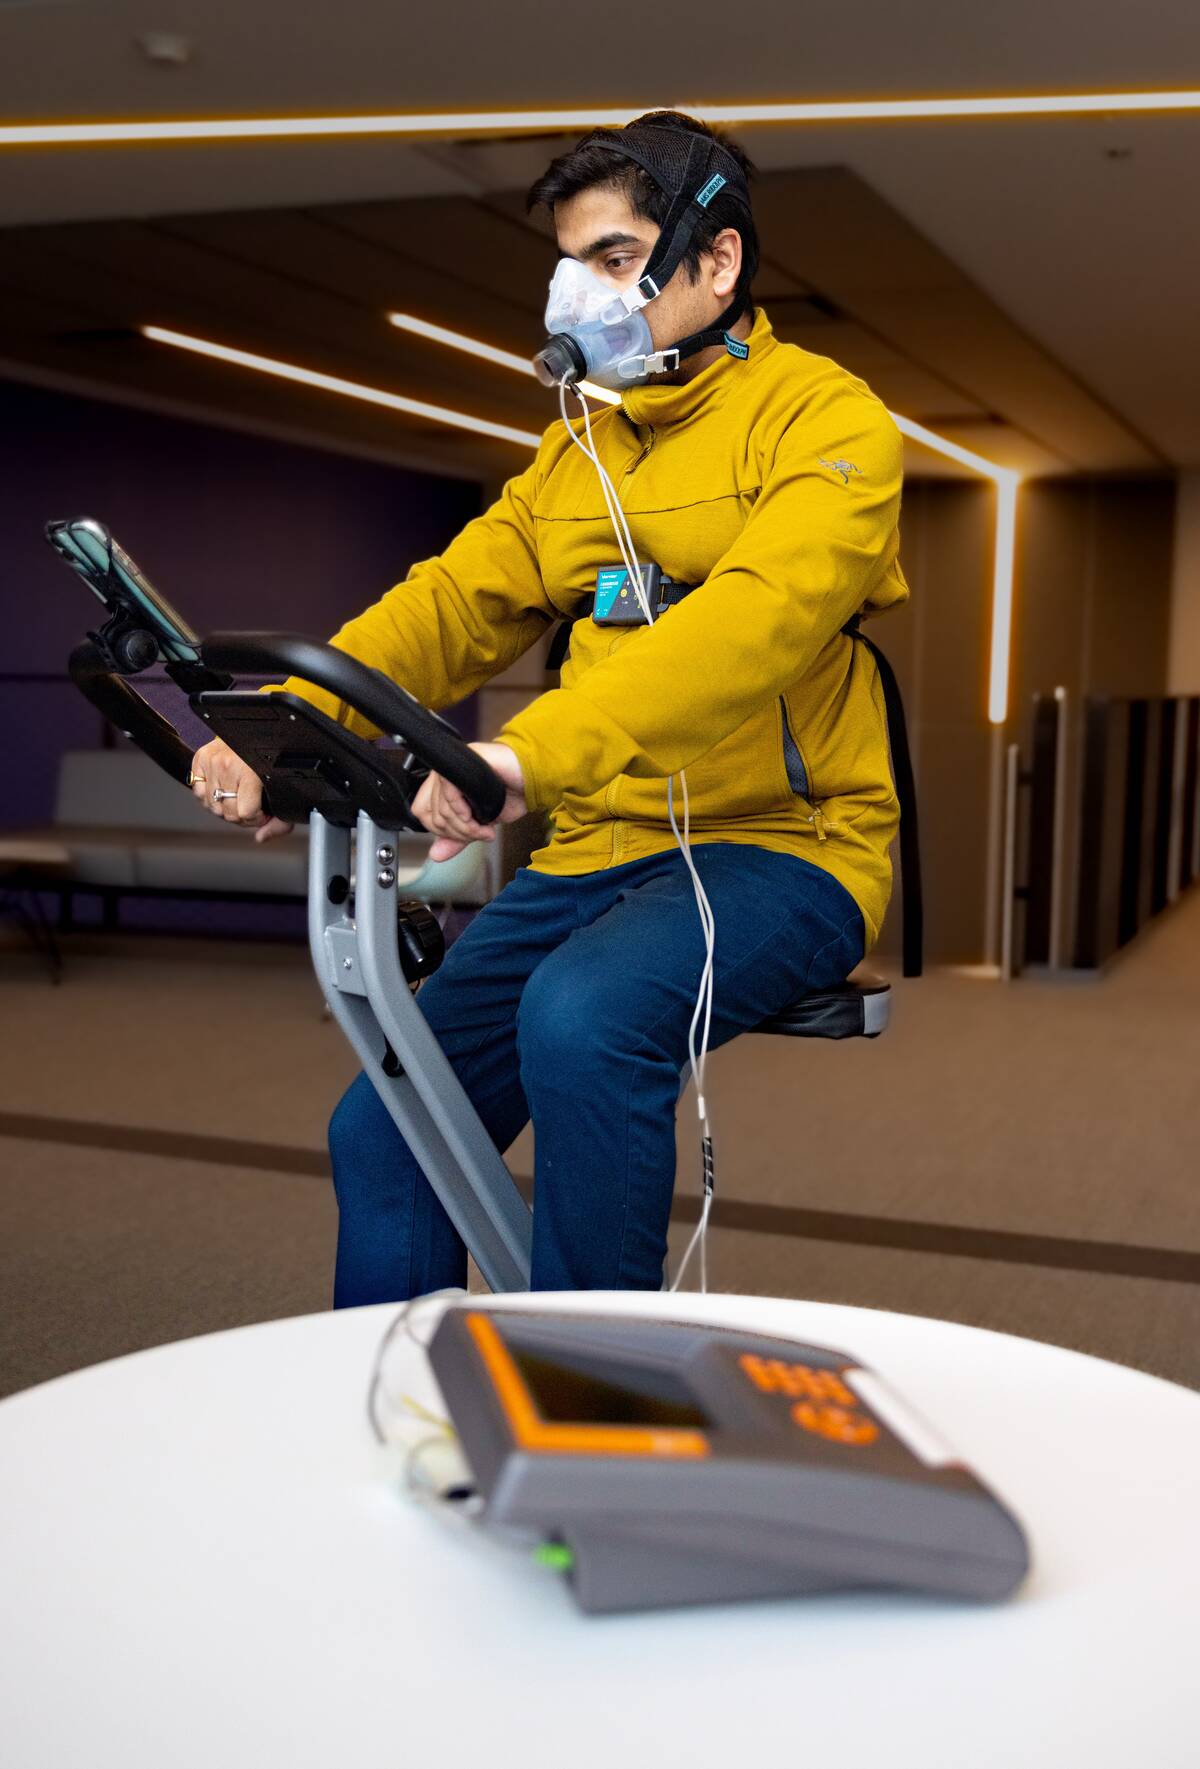 A man on a treadmill has a mask over his nose and mouth to capture his breathing.